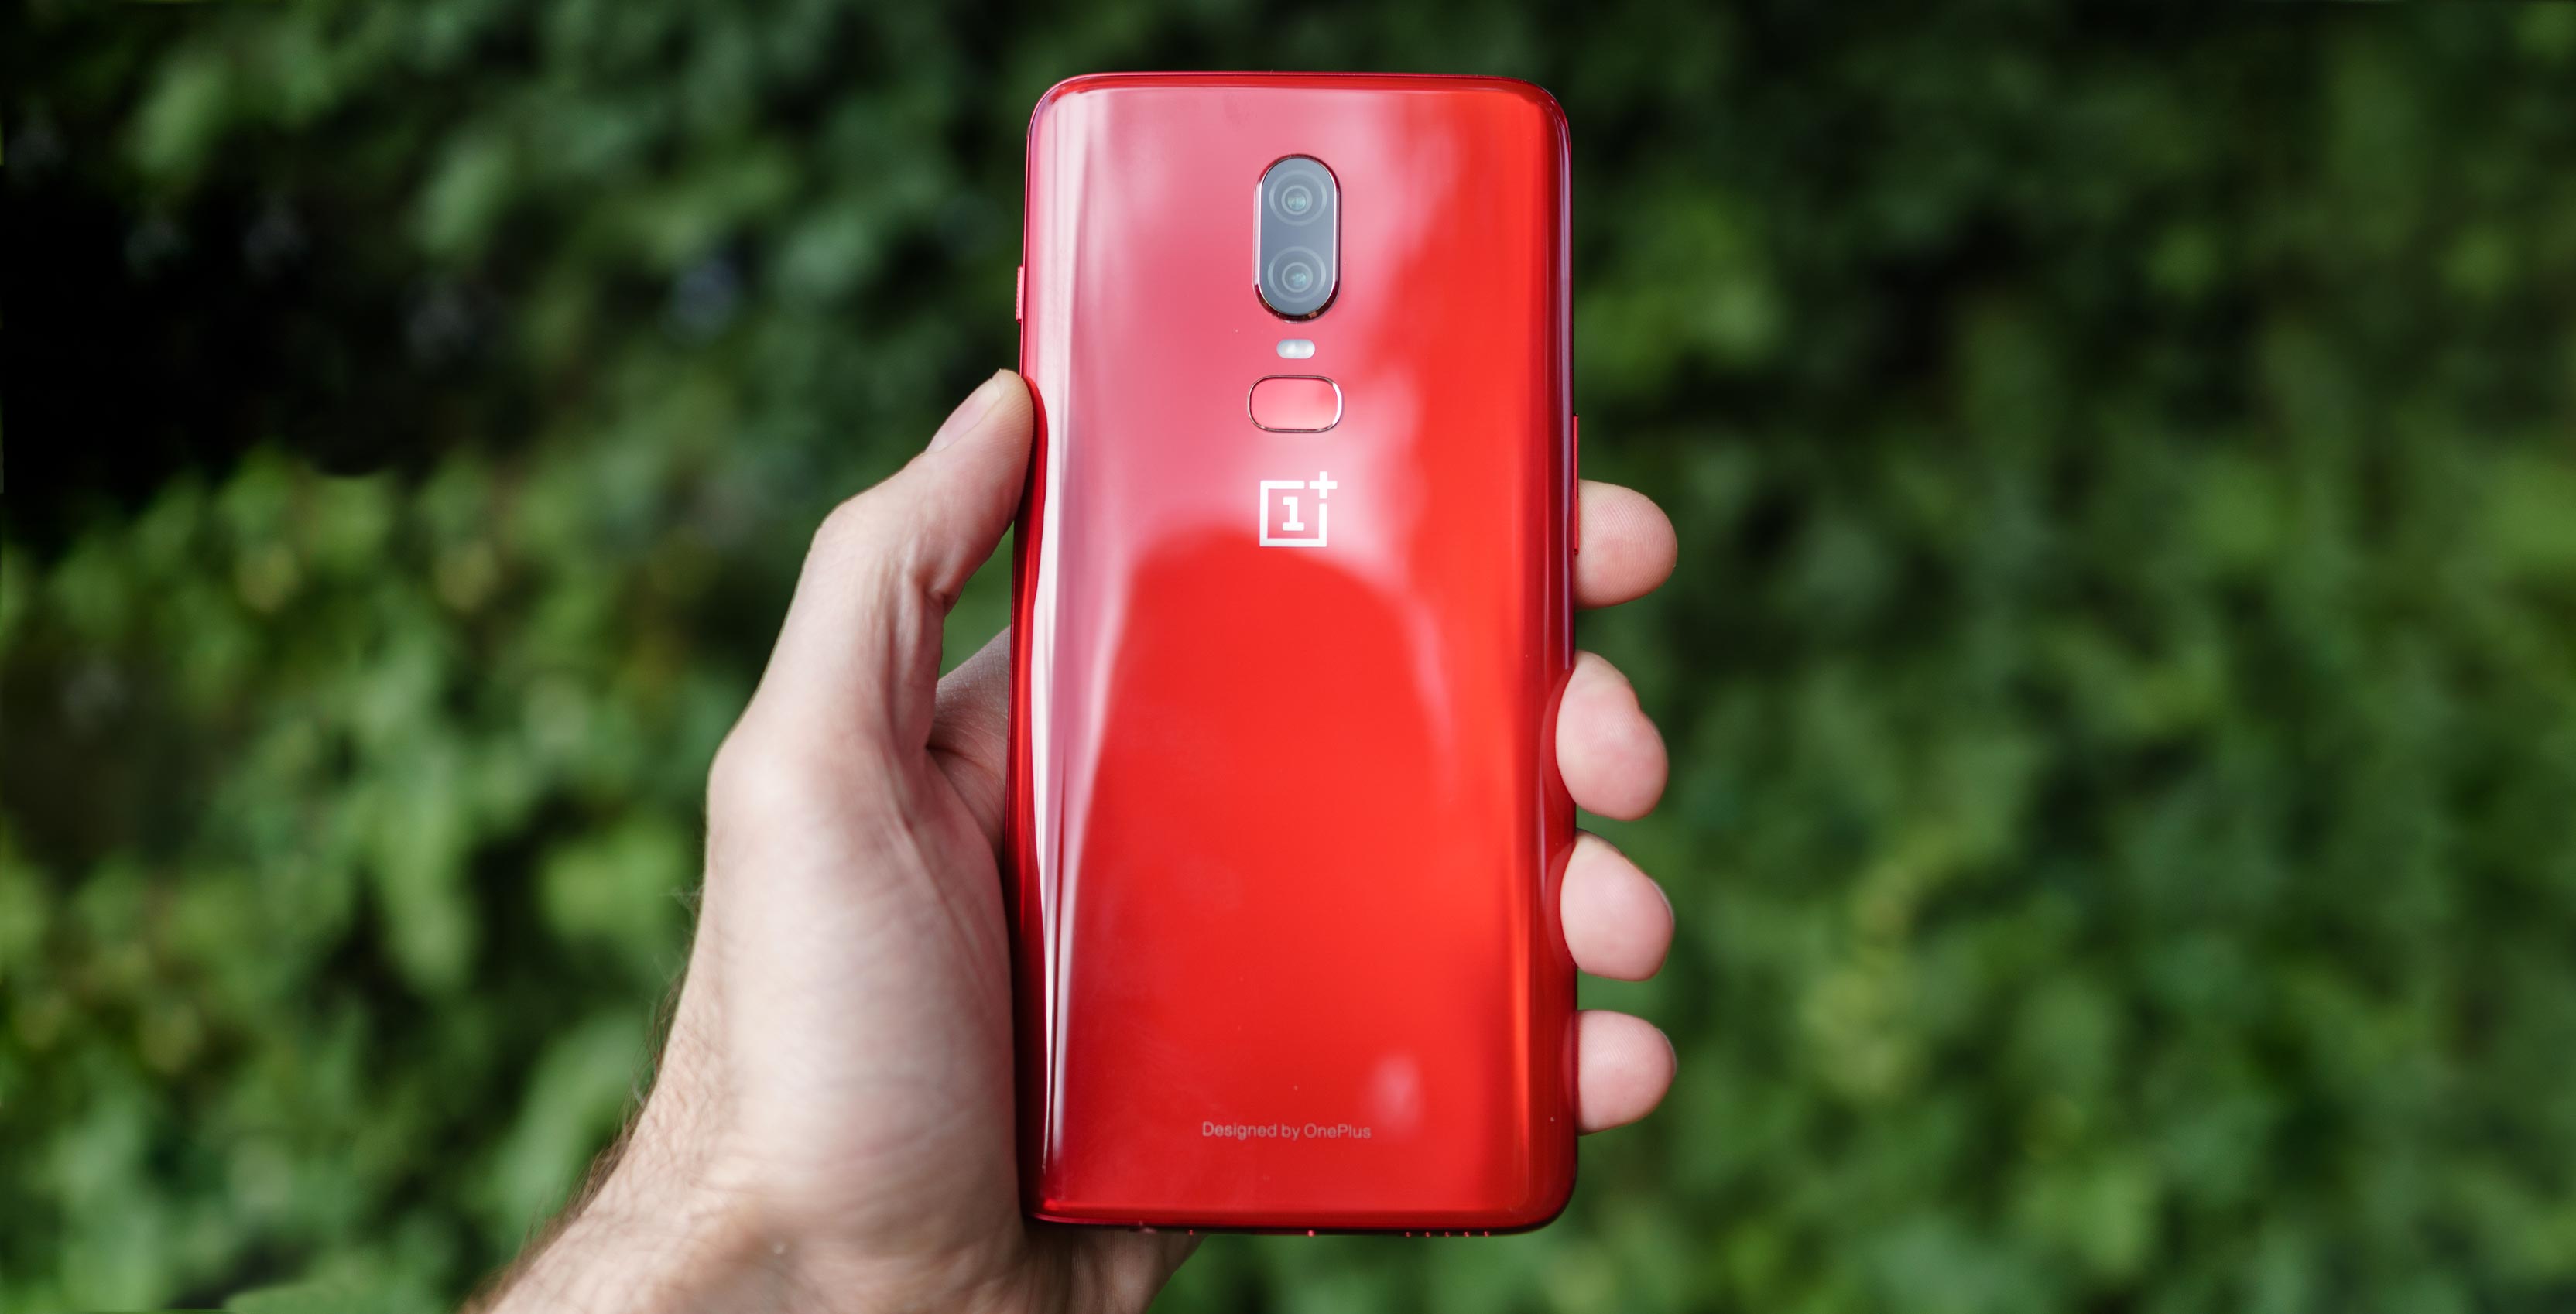 The OnePlus 6 in 'Red'